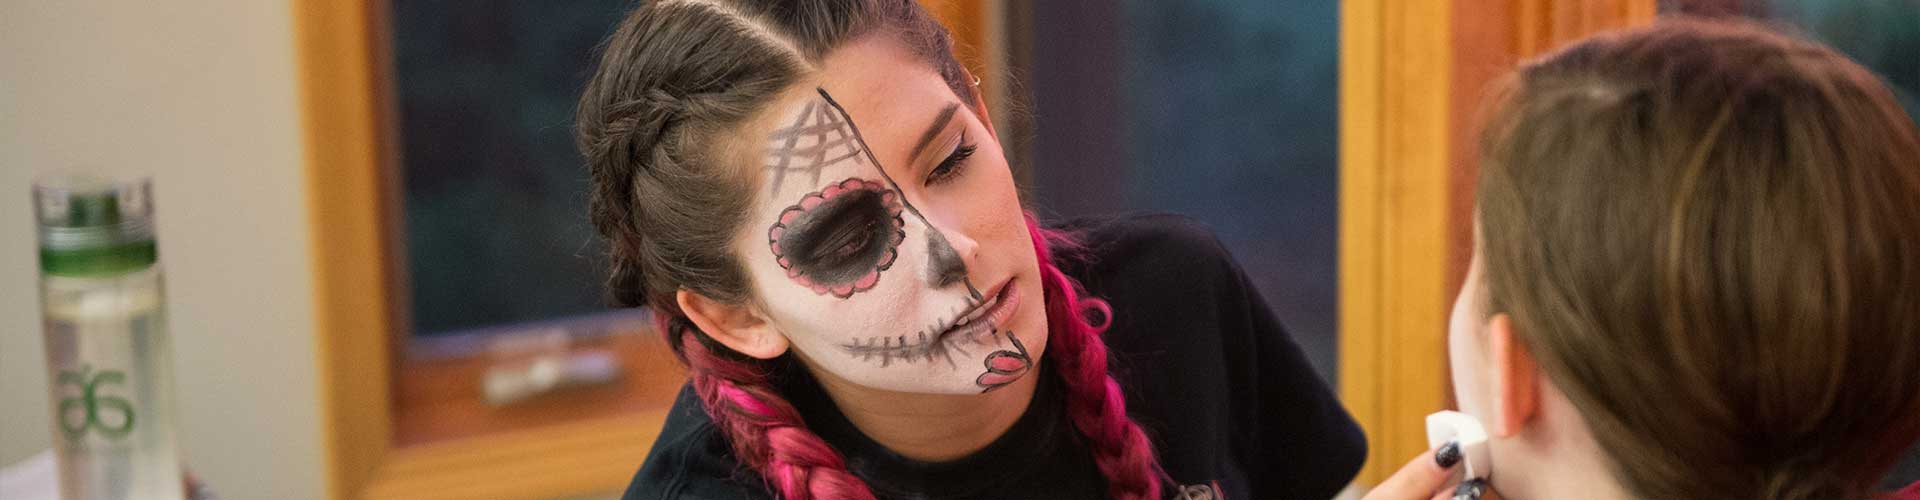 Day of the Dead face paint session